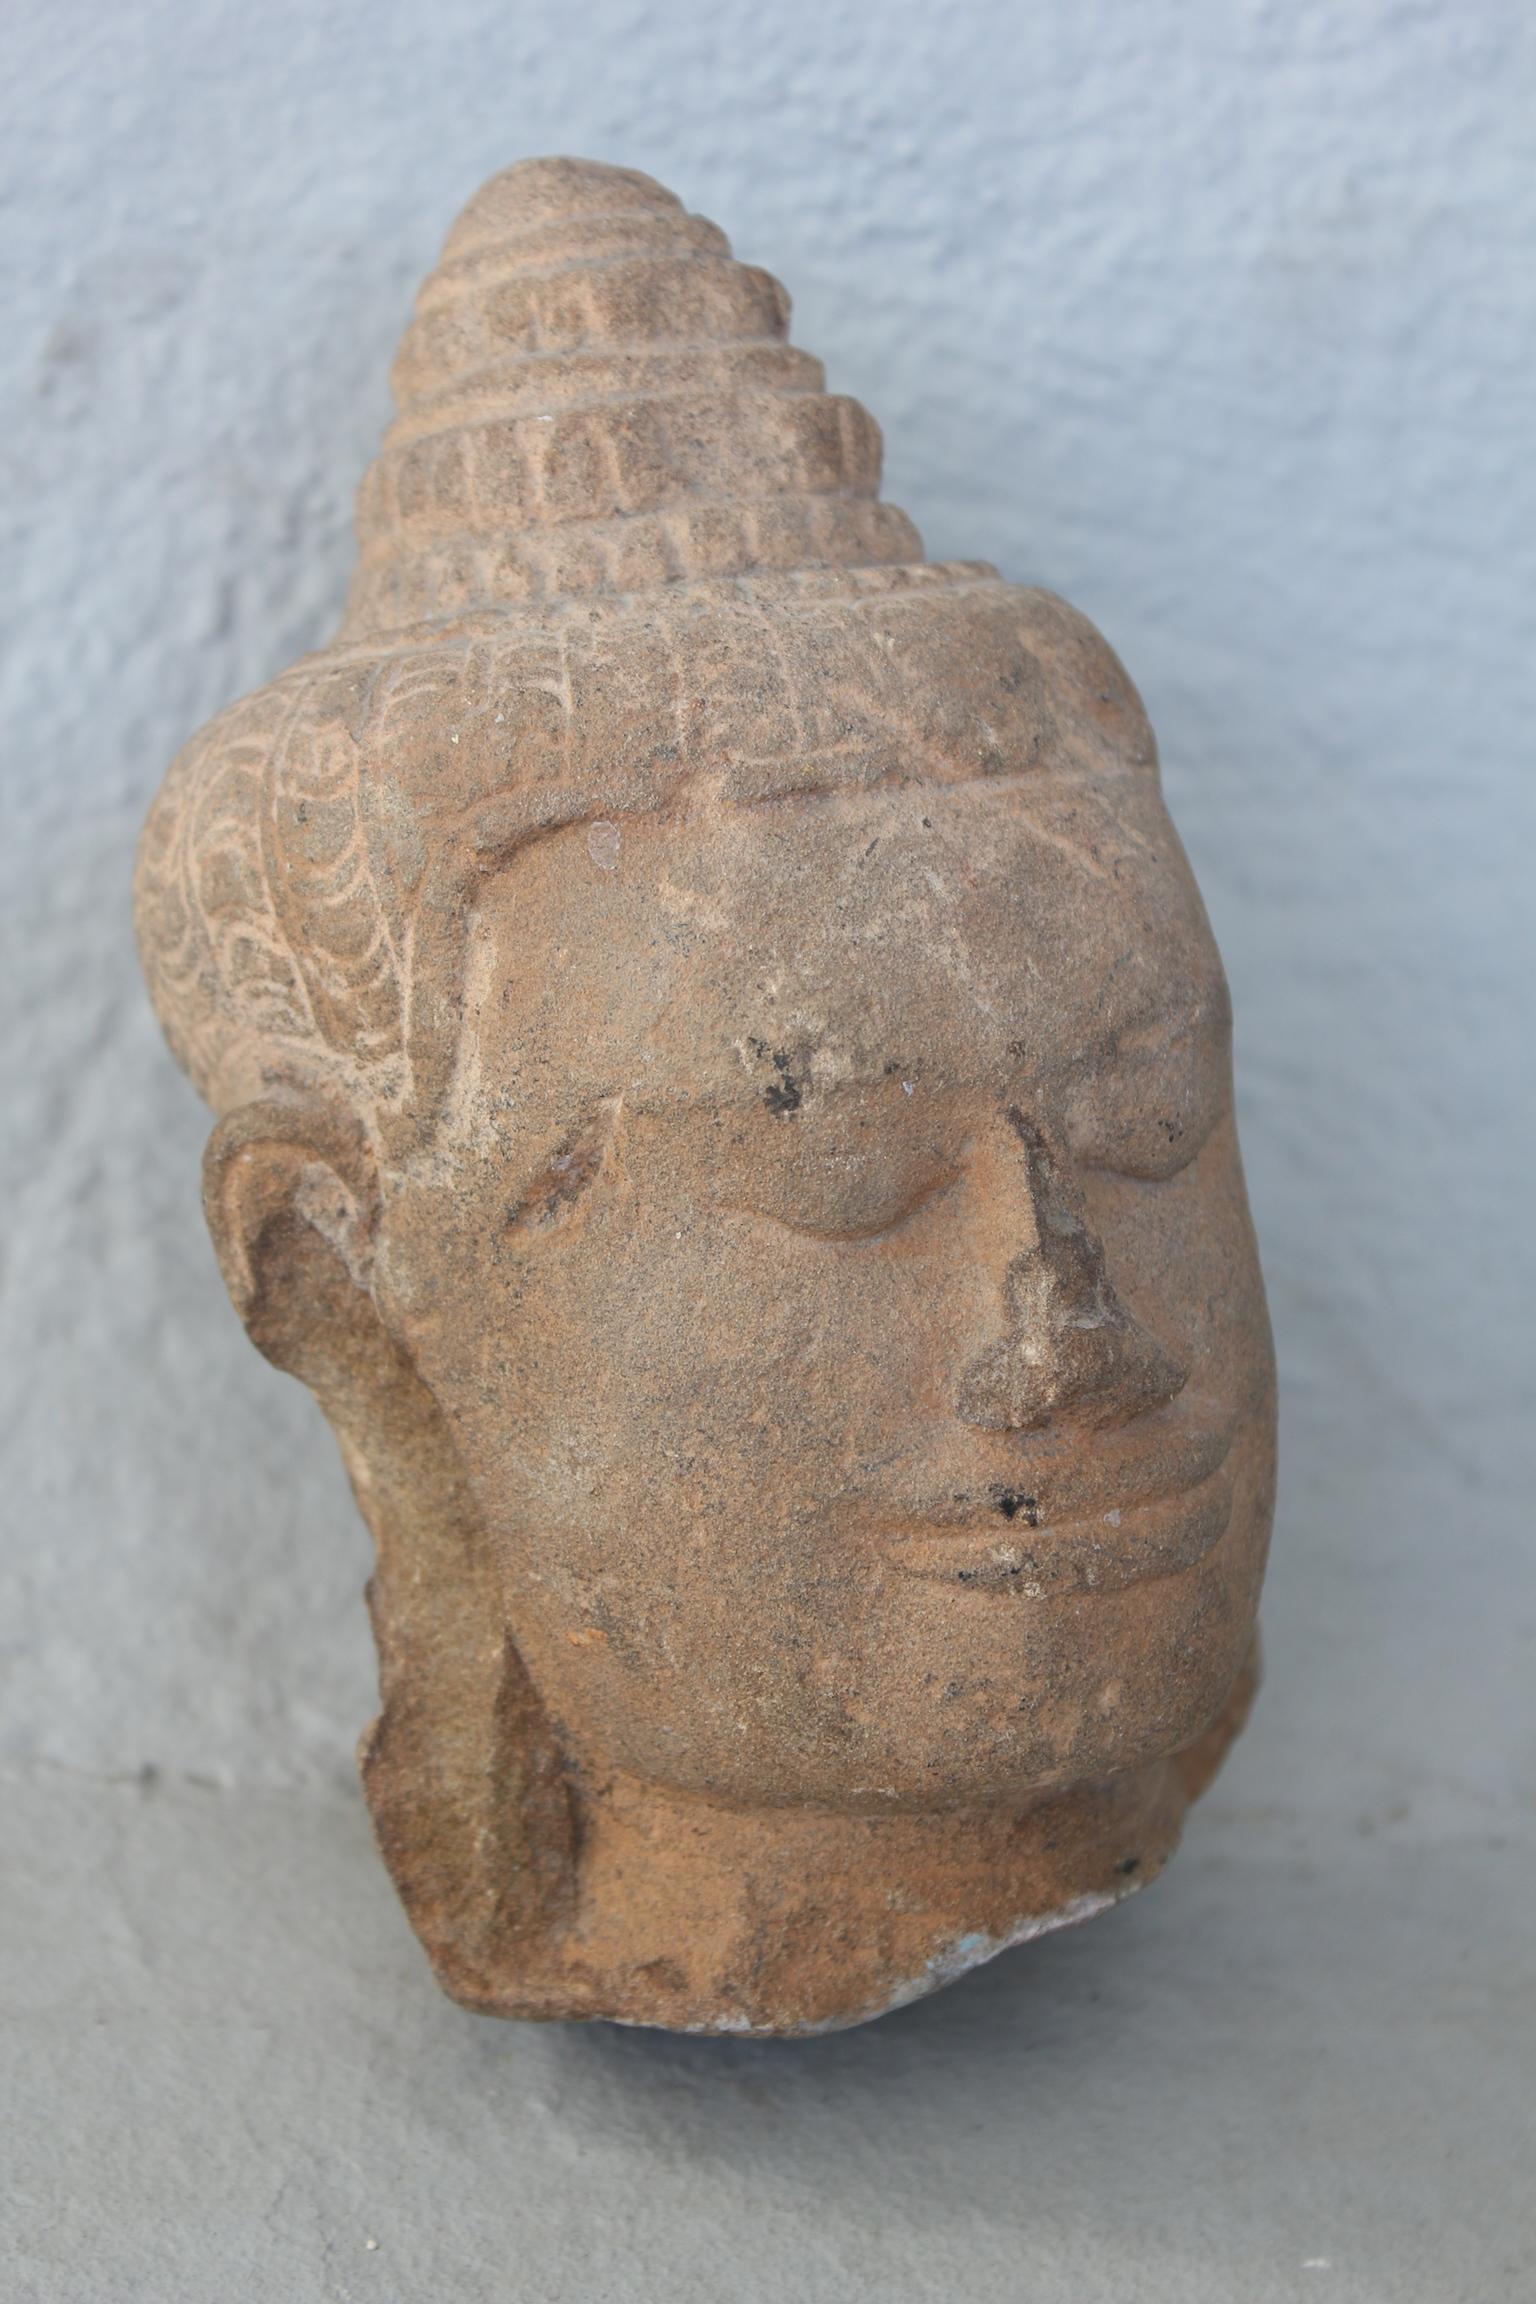 Buddha head sculpture in sandstone, Angkor temple, 13th century.
Authentic piece, appraised.
Dimensions: Height 15.5cm, depth 8cm, width 9cm